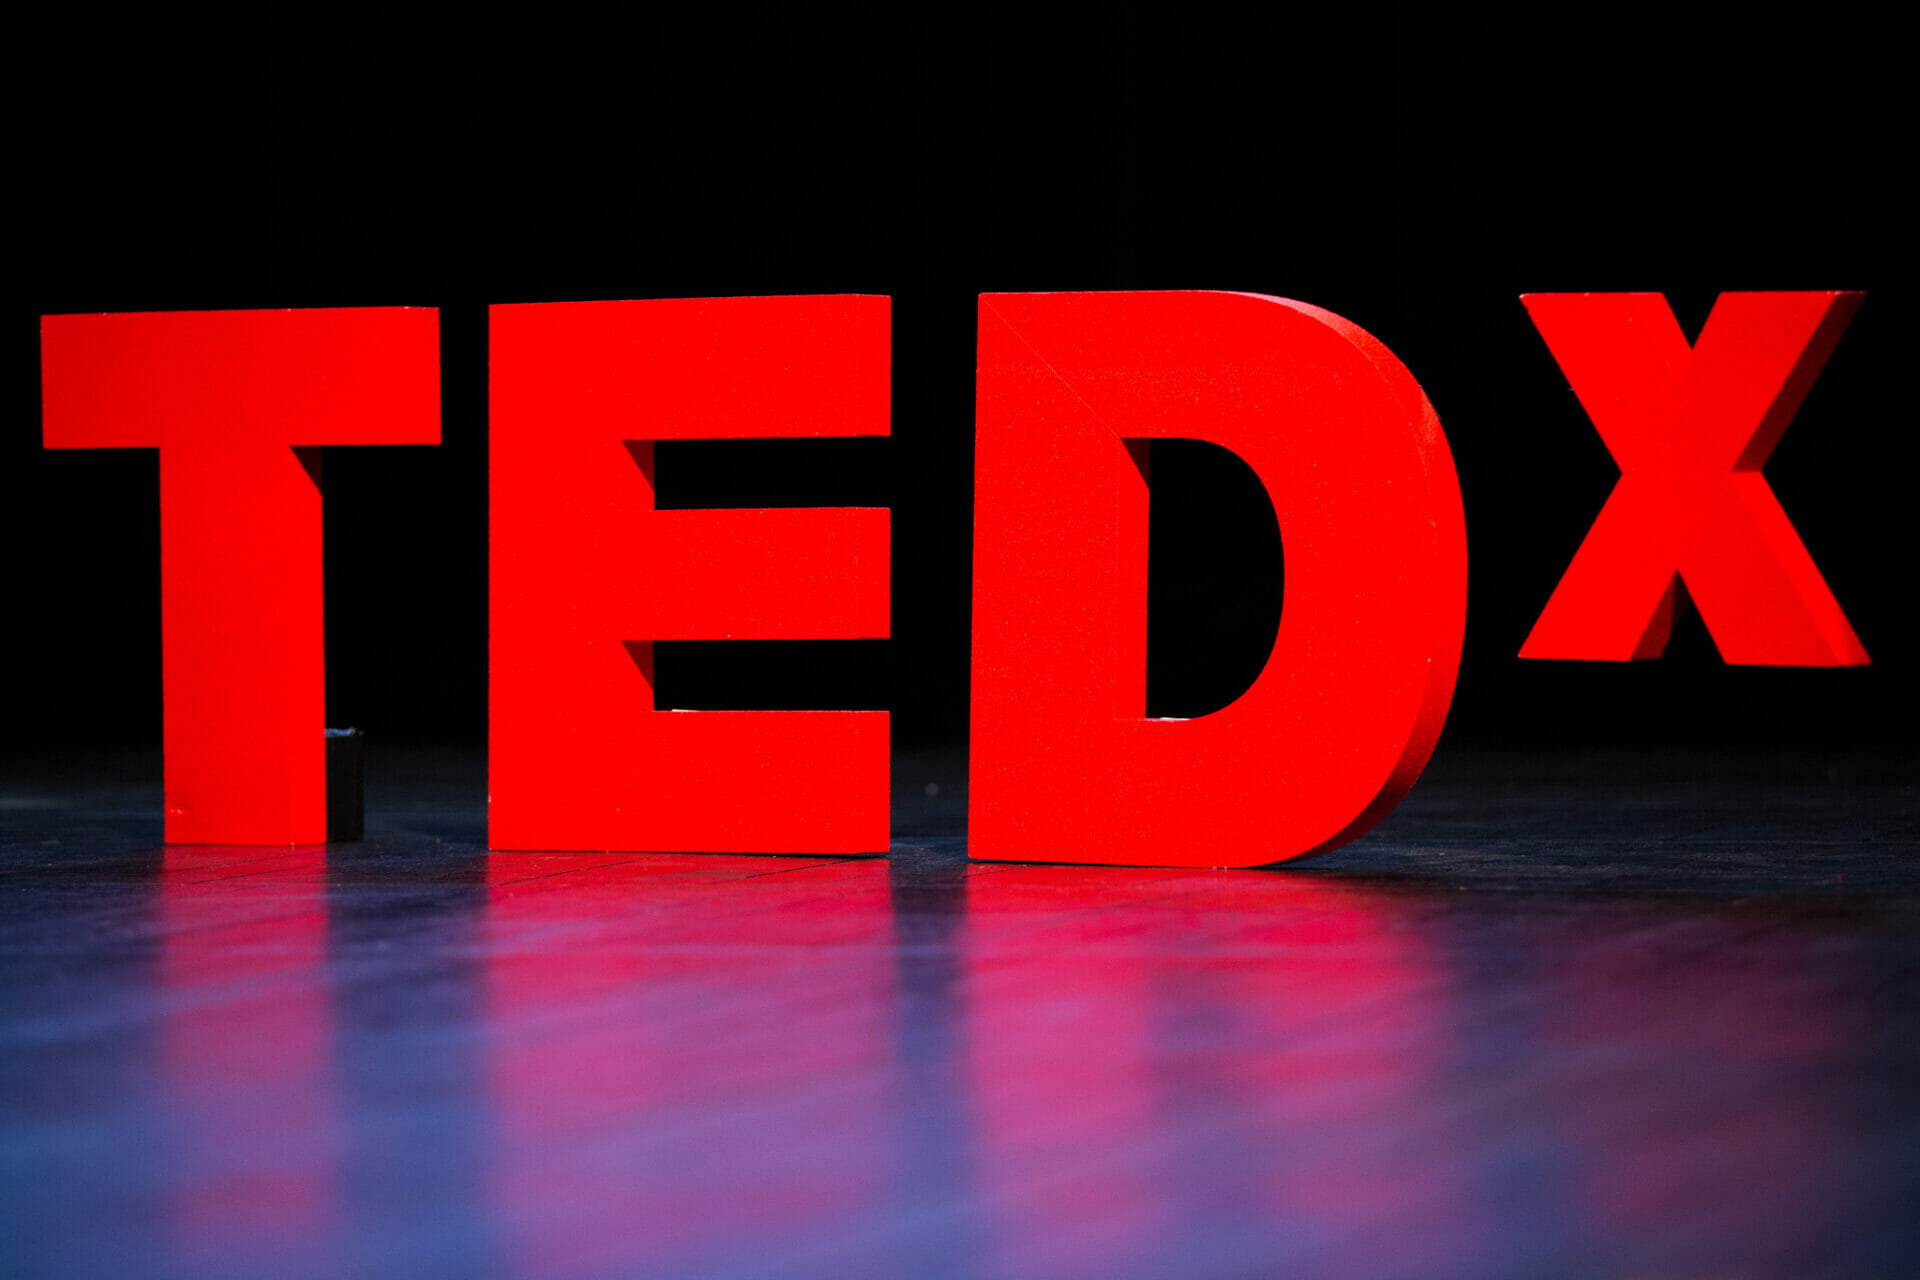 Why You Can't Miss The Next TEDx "Passion" Event